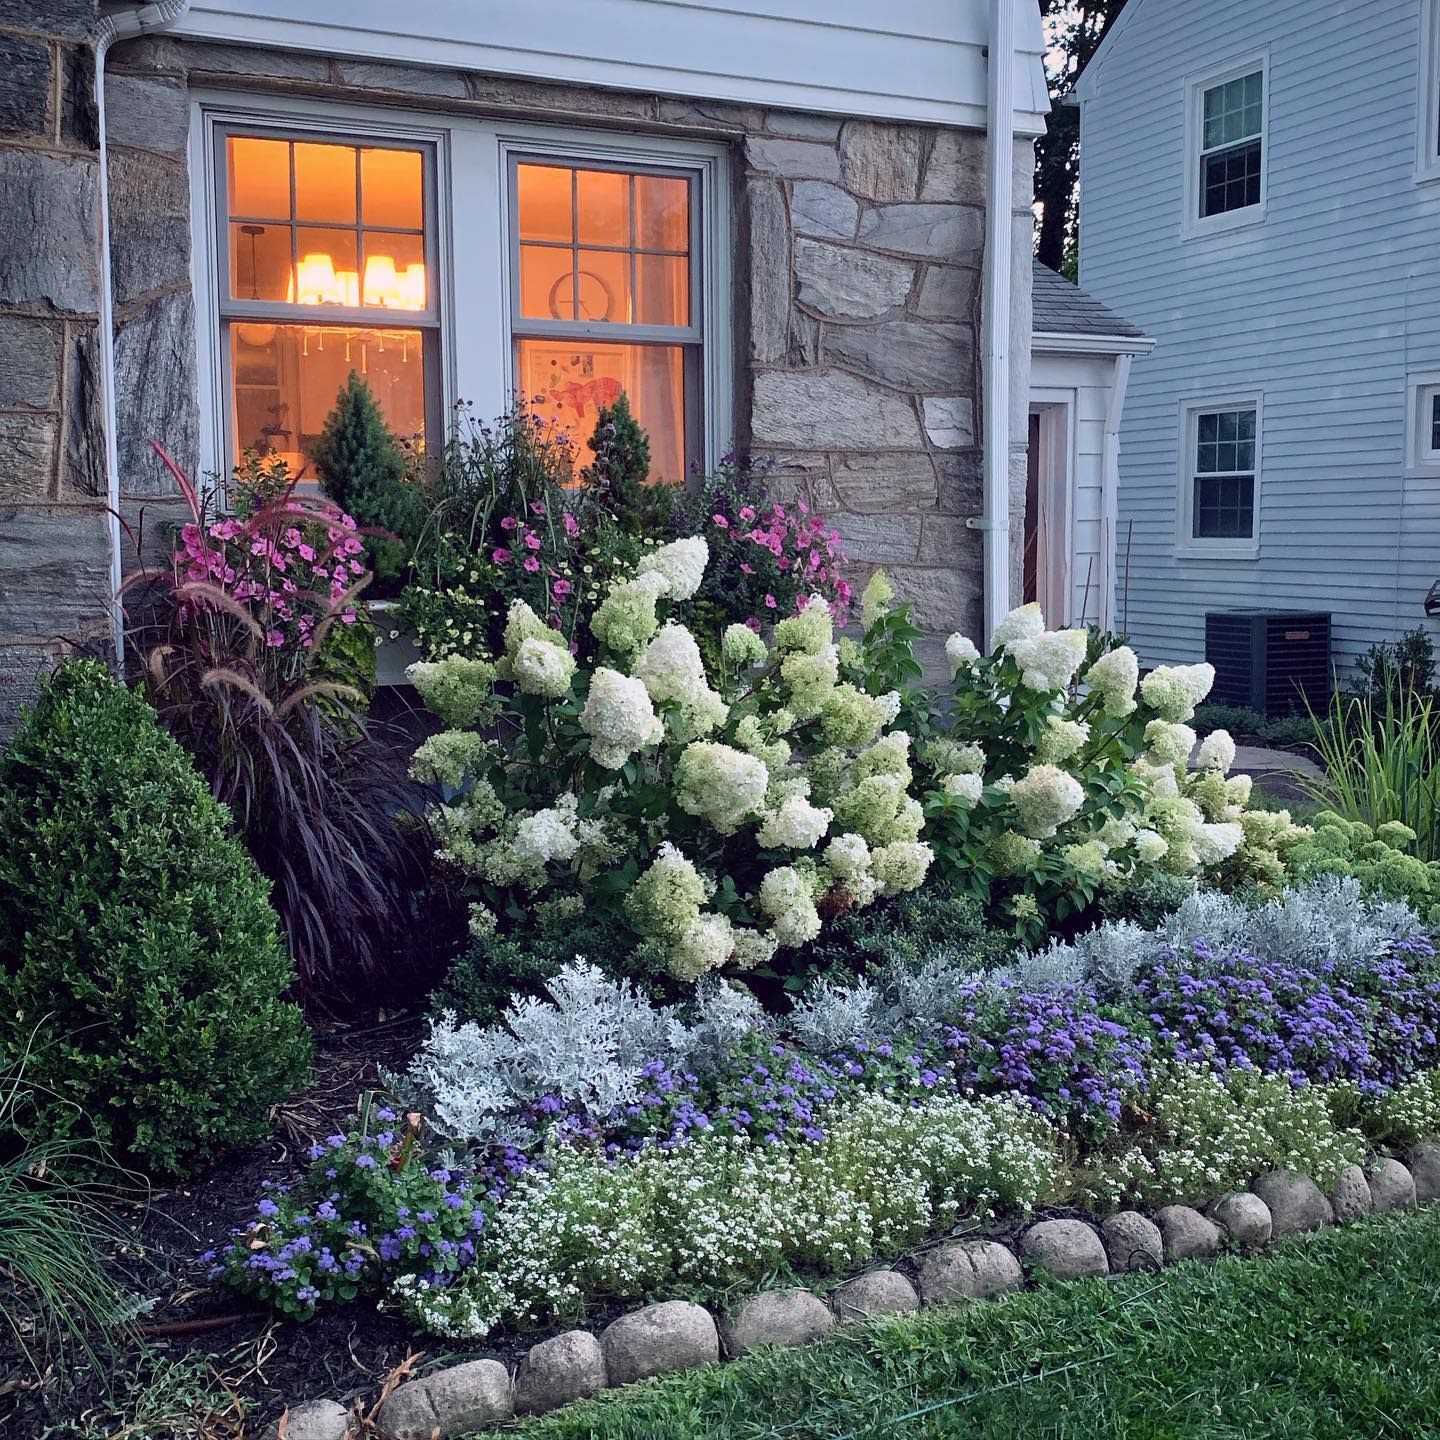 Creating Curb Appeal: Front Yard
Landscaping Ideas